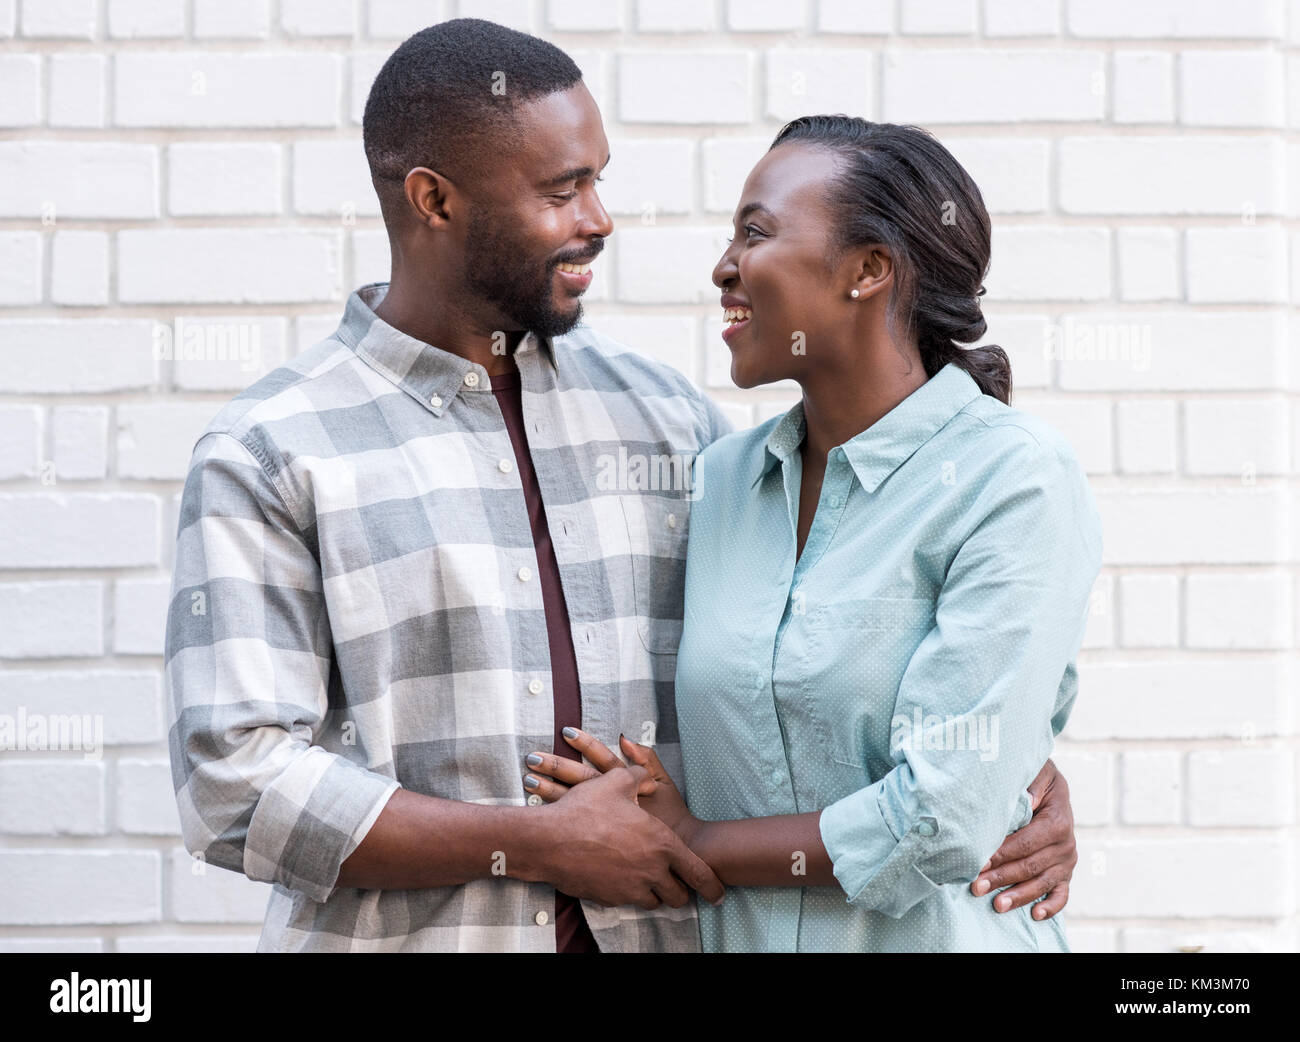 Affectionate young African couple standing together in the city Stock Photo